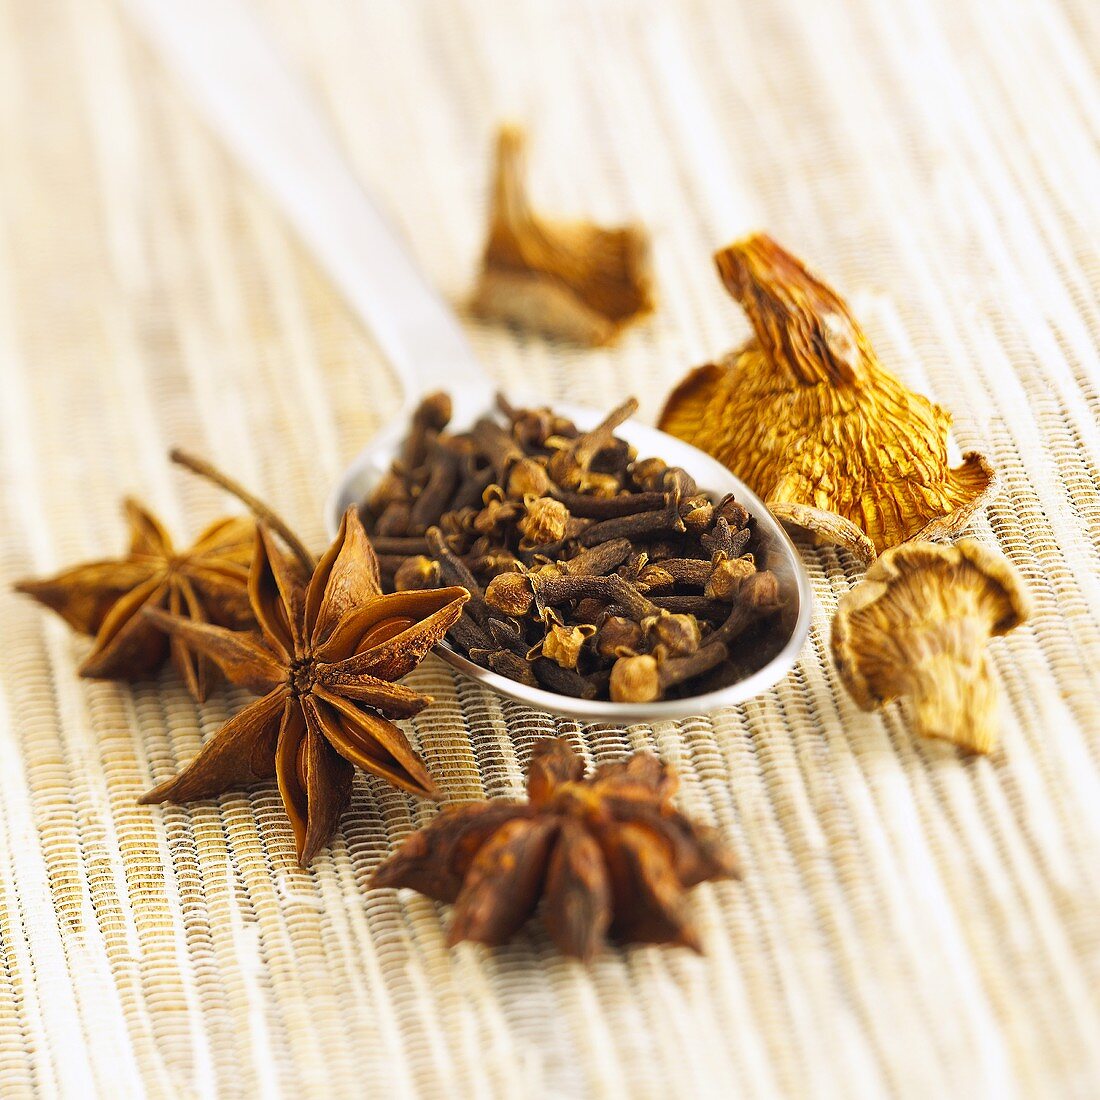 Star anise, cloves and dried mushrooms